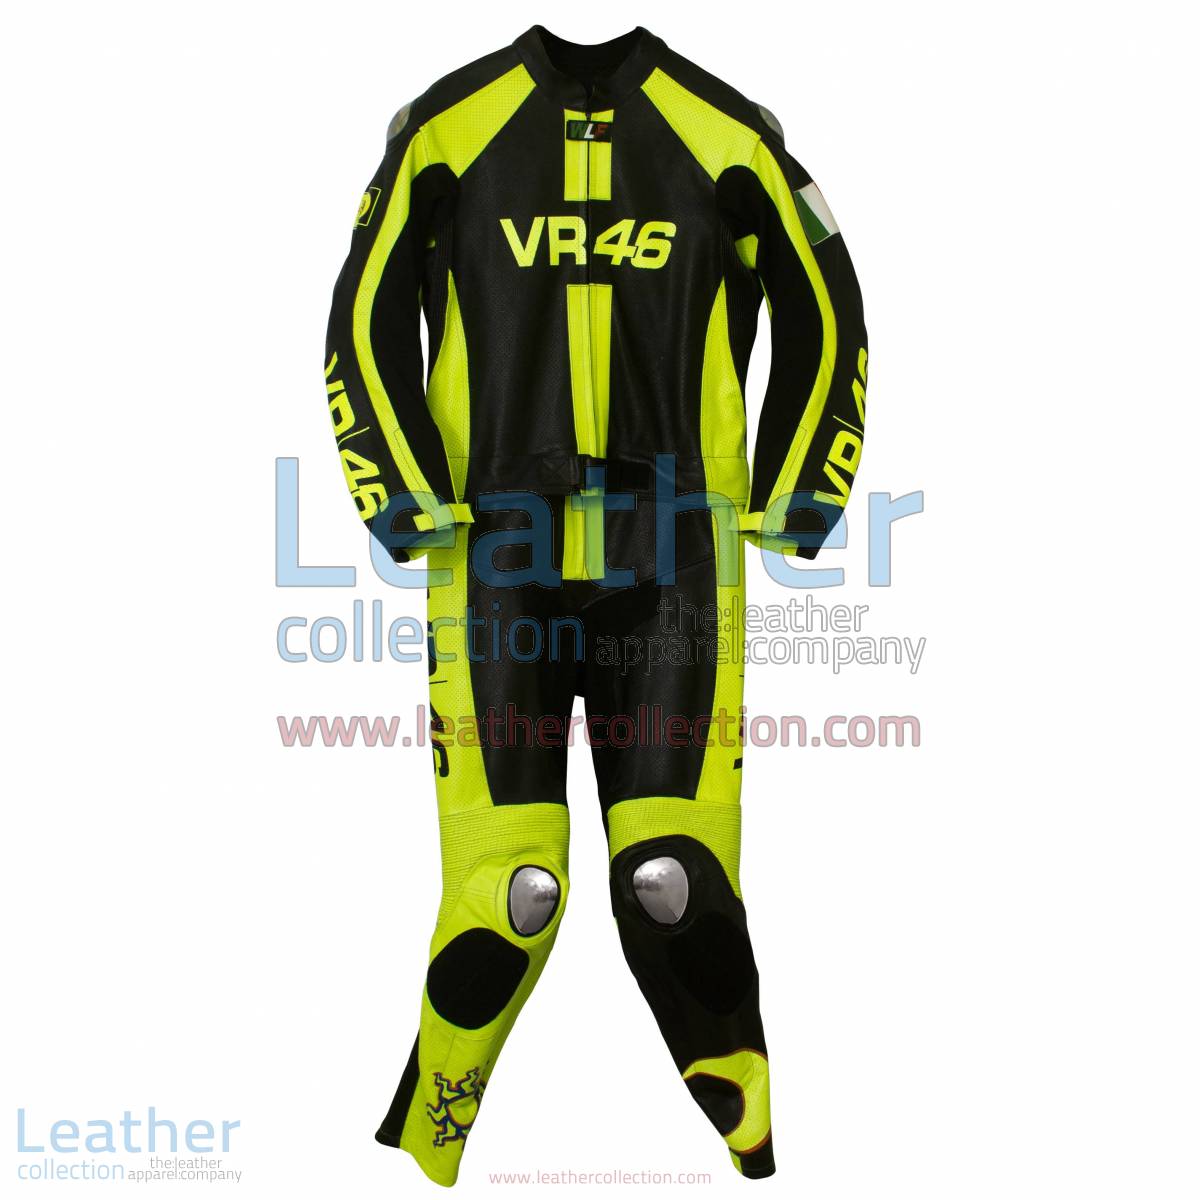 VR46 Valentino Rossi Motorcycle Race Suit